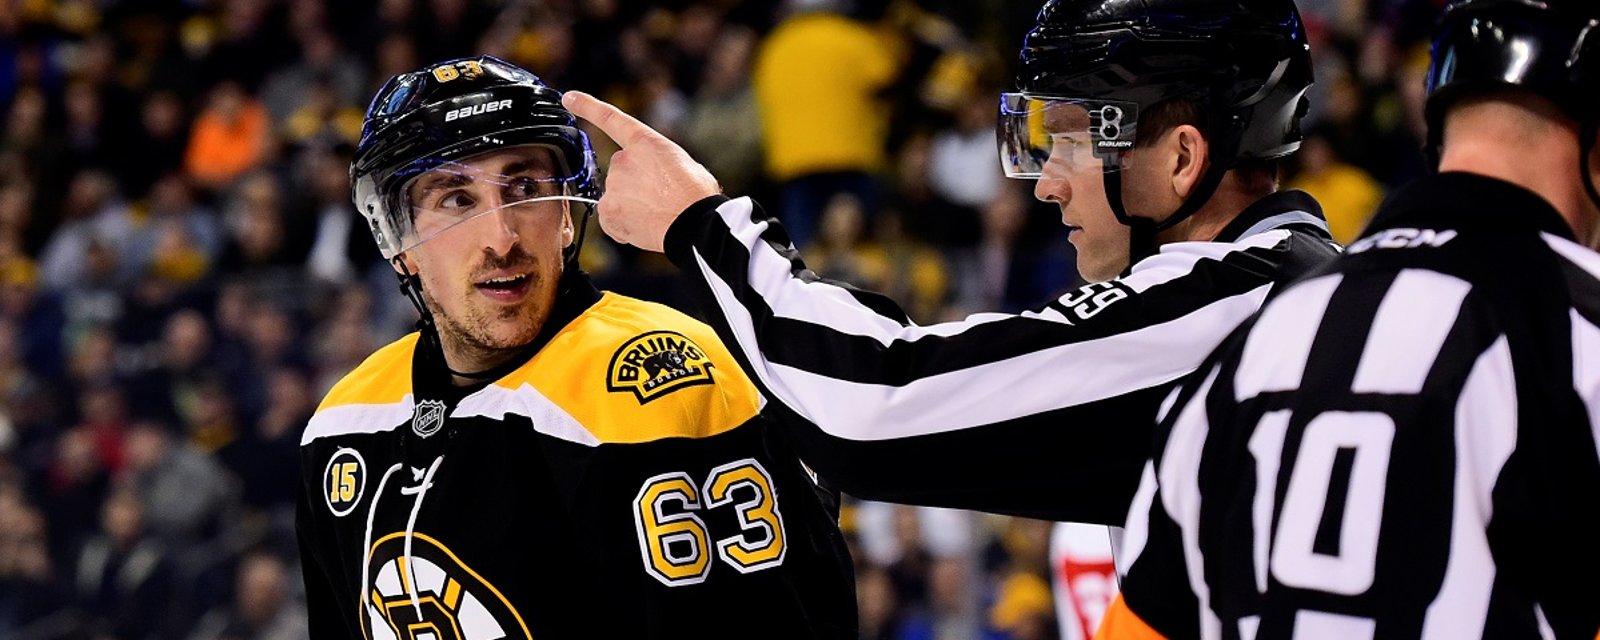 There may finally be proof that Brad Marchand is actually the Anti-Christ.